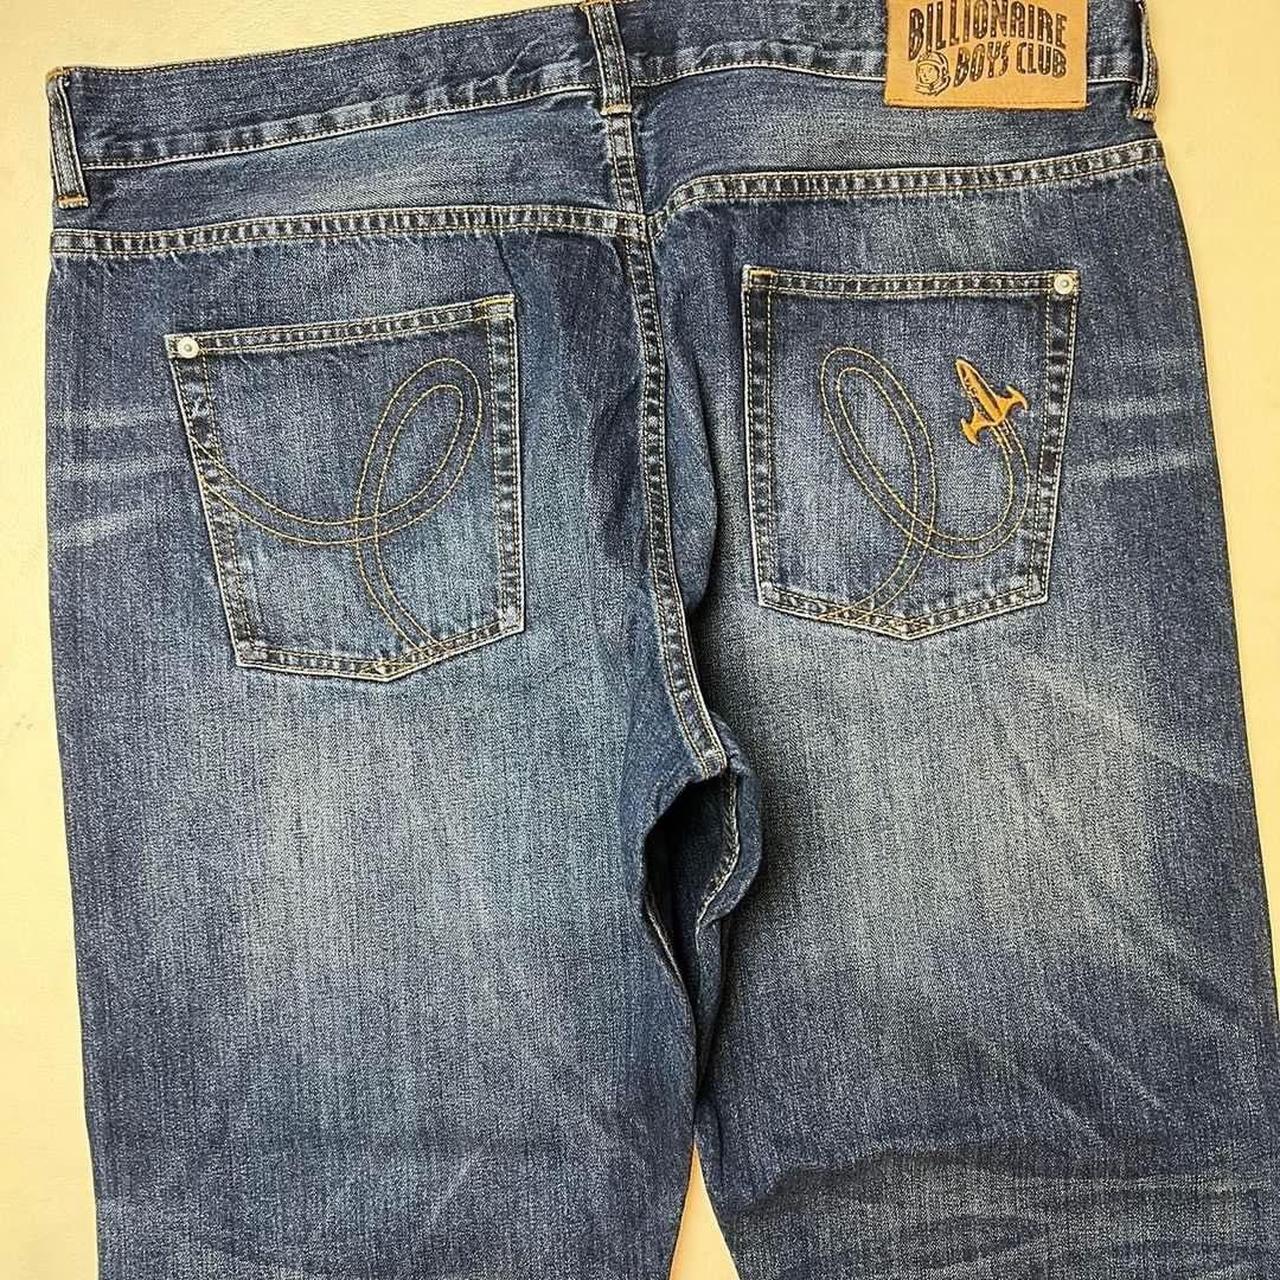 Billionaire boys club jeans 40w really nice fit and... - Depop